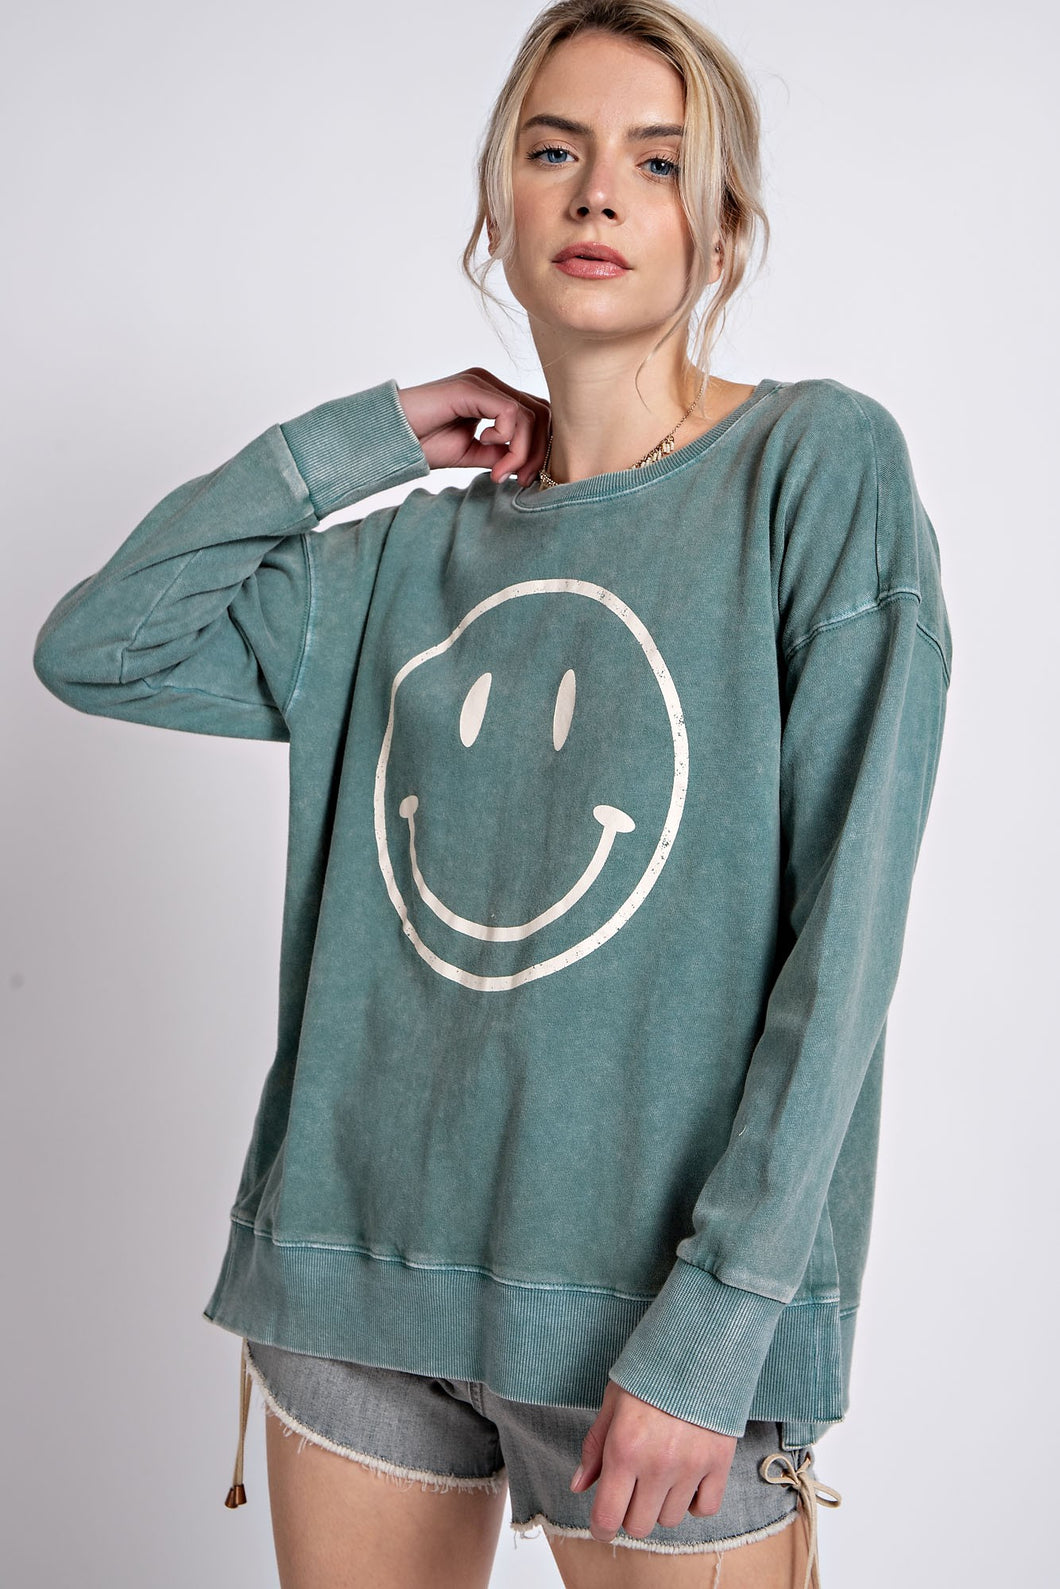 Easel Smiley Face Top in Teal Green Shirts & Tops Easel   